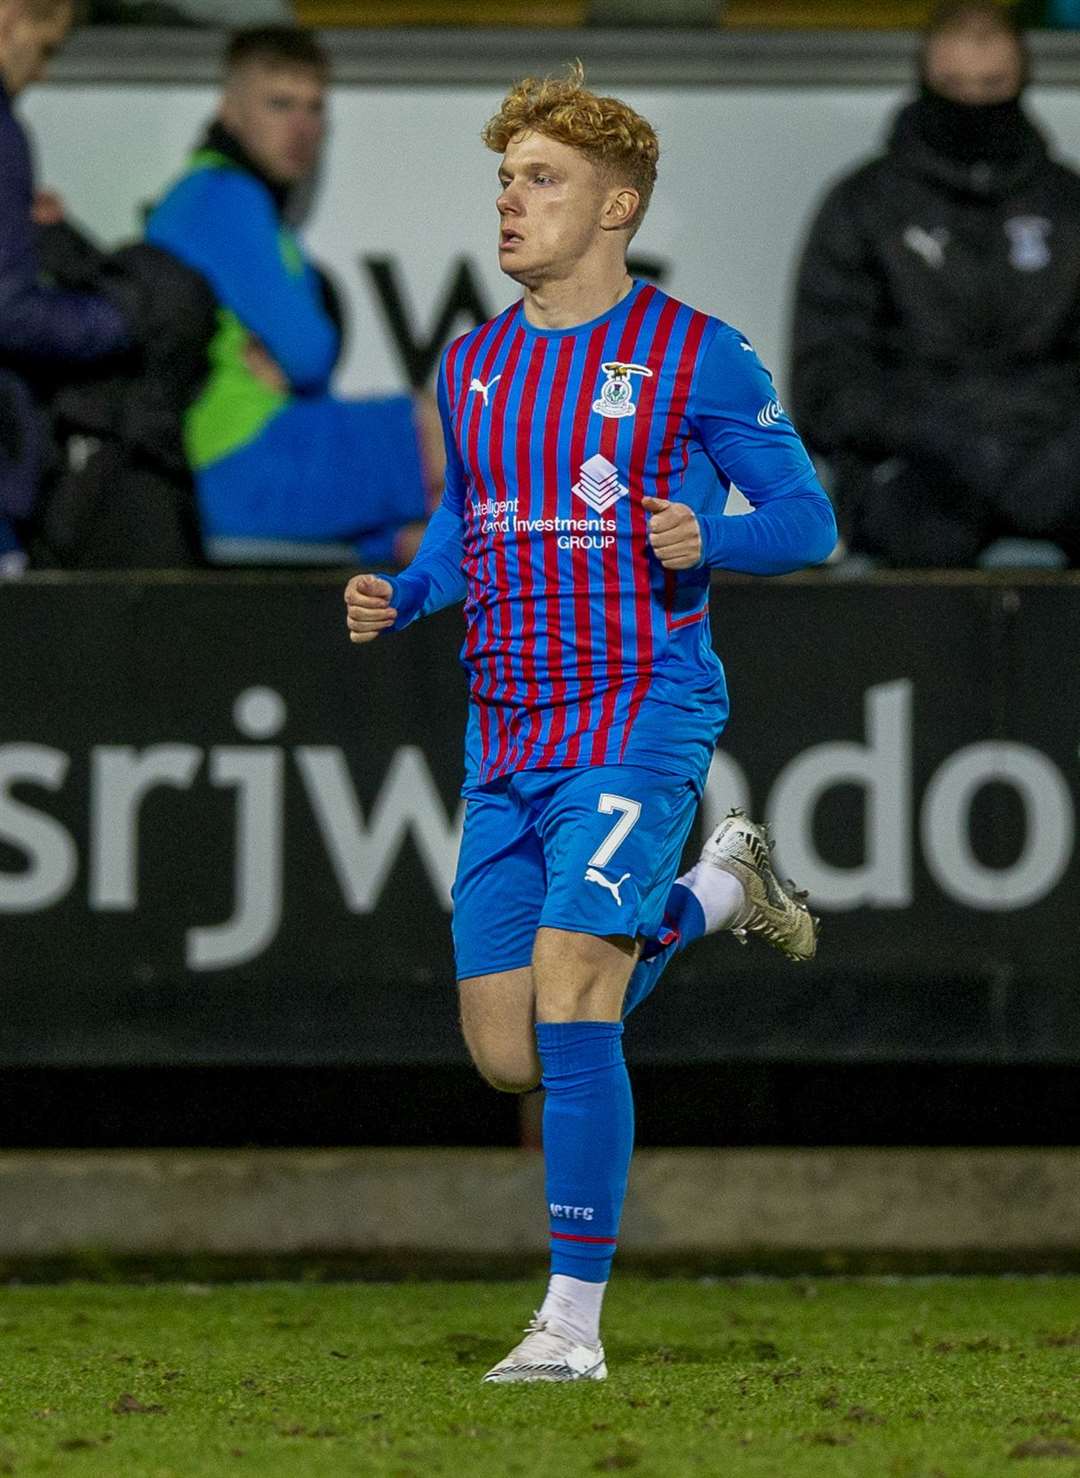 Picture - Craig Brown. Dunfermline(1) v Inverness CT(1). 22.01.22. ICT’s new loan signing Sam Pearson came on as a replacement for Cameron Harper.